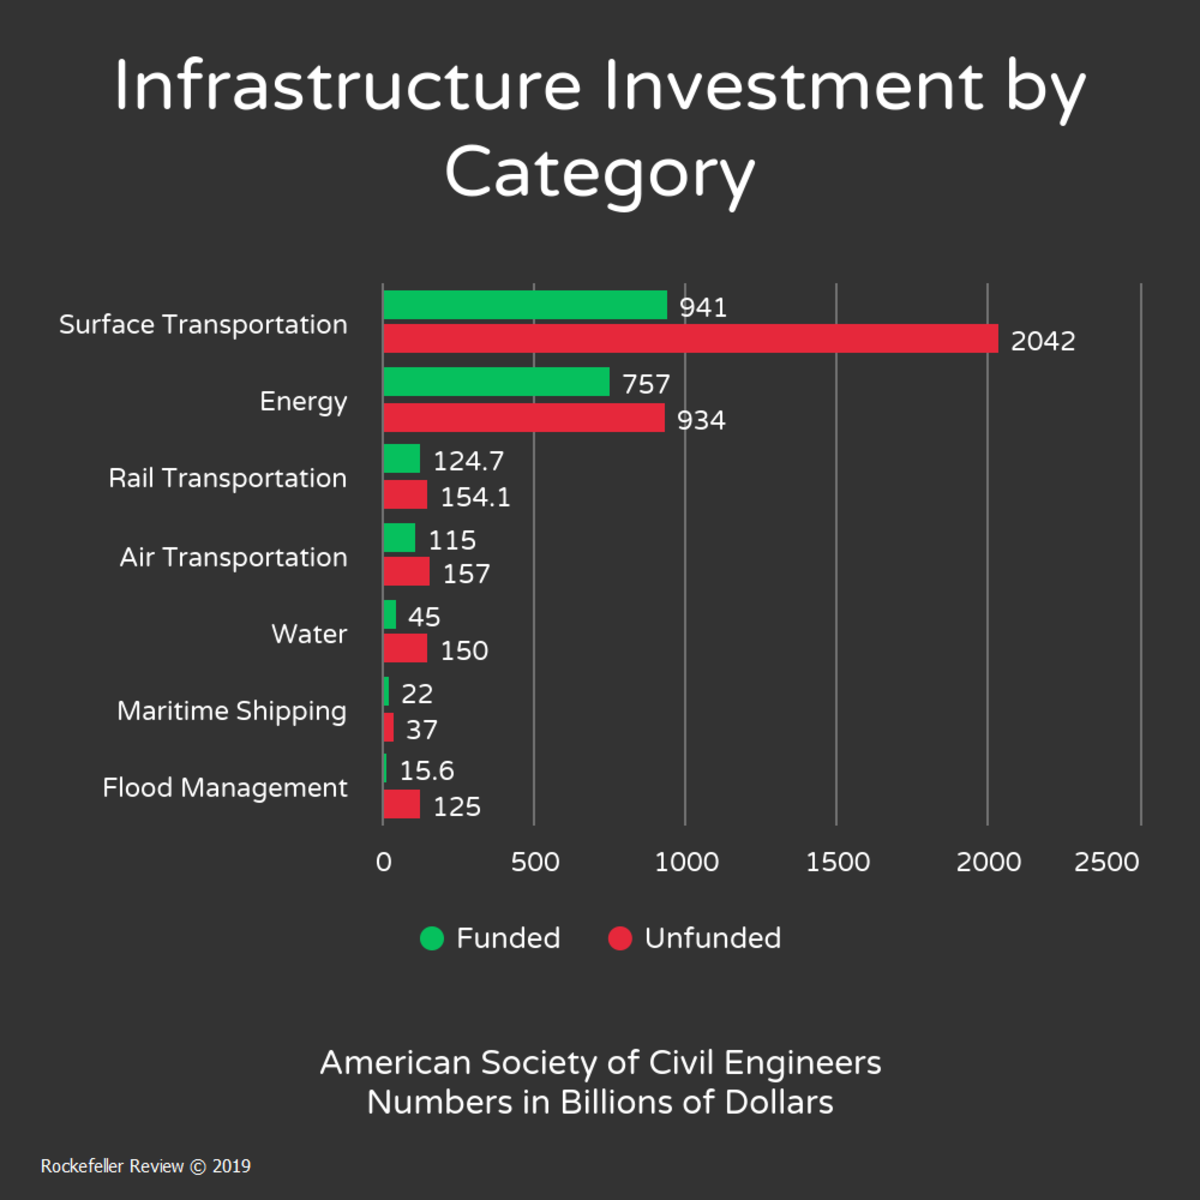 Investment funding gap by infrastructure category. 